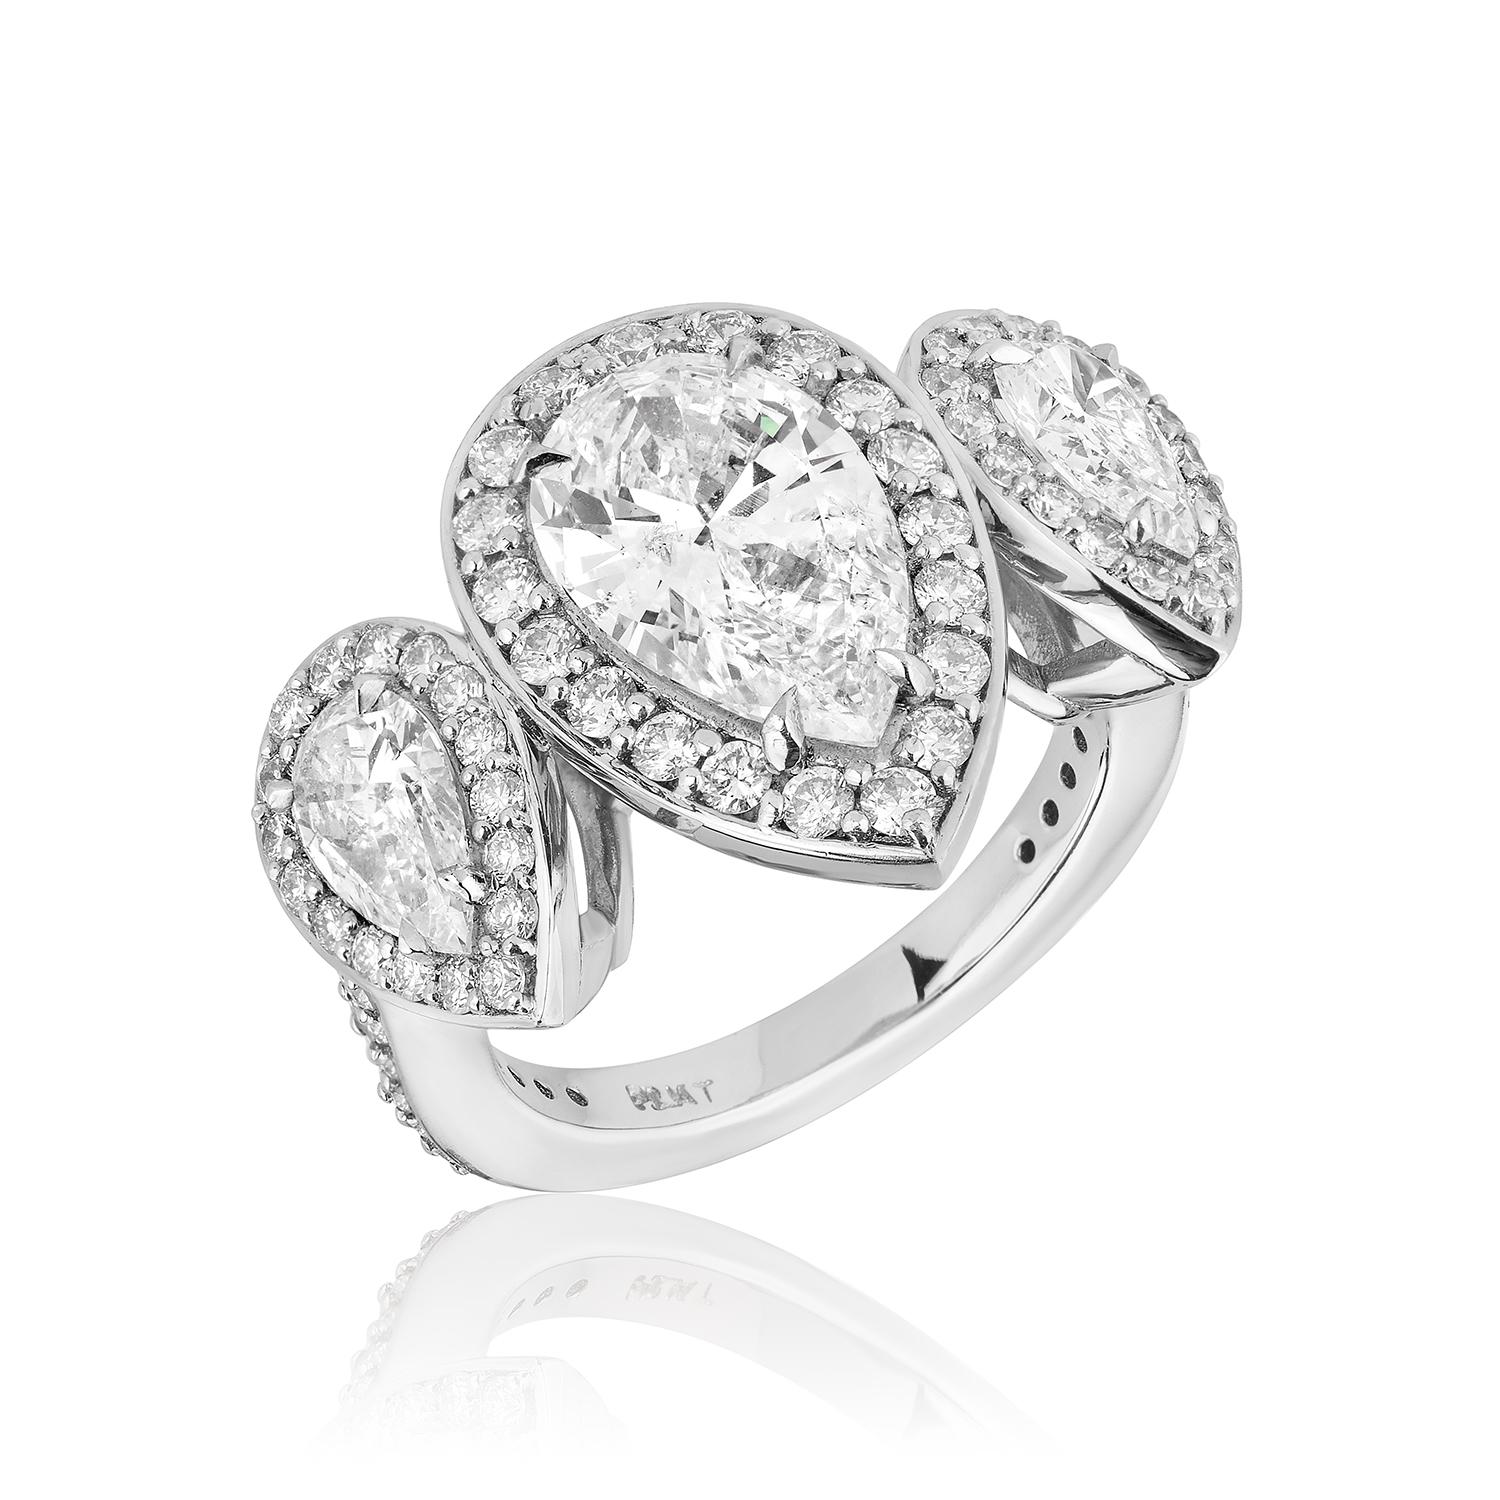 Three Stone Pear Shaped Ring.
Centered upon a 2.17 Carat Stone Flanked By 2 Pear Shapes weighing 1.02 Carats.
Diamond Pave weighing 1.30 Carats.
All stones are of EF Color.
Set in Platinum.